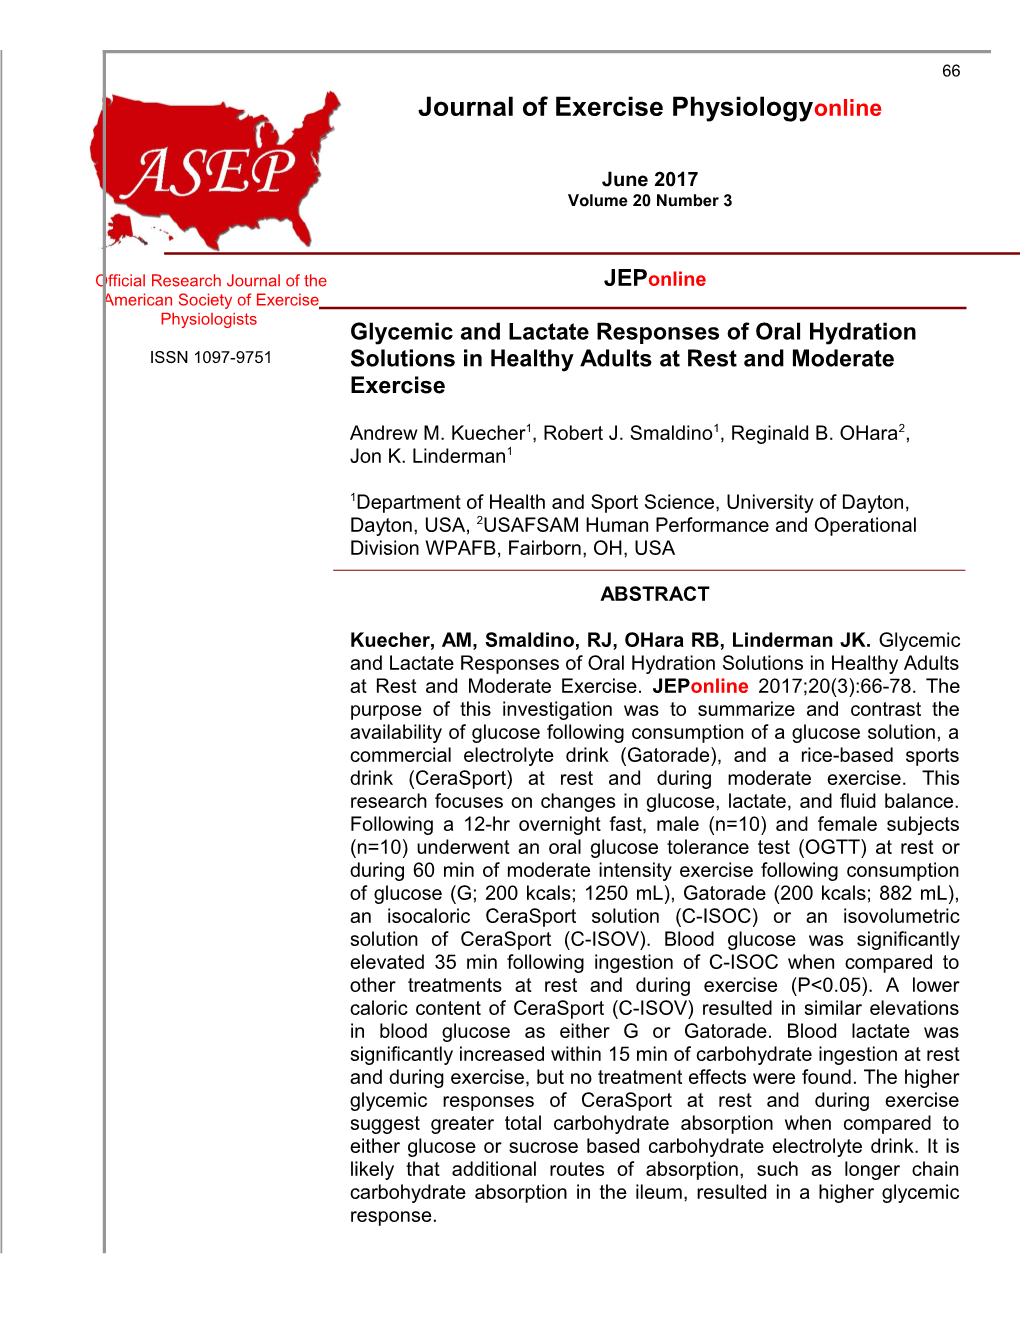 Glycemic and Lactate Responses of Oralhydration Solutions in Healthy Adults at Rest